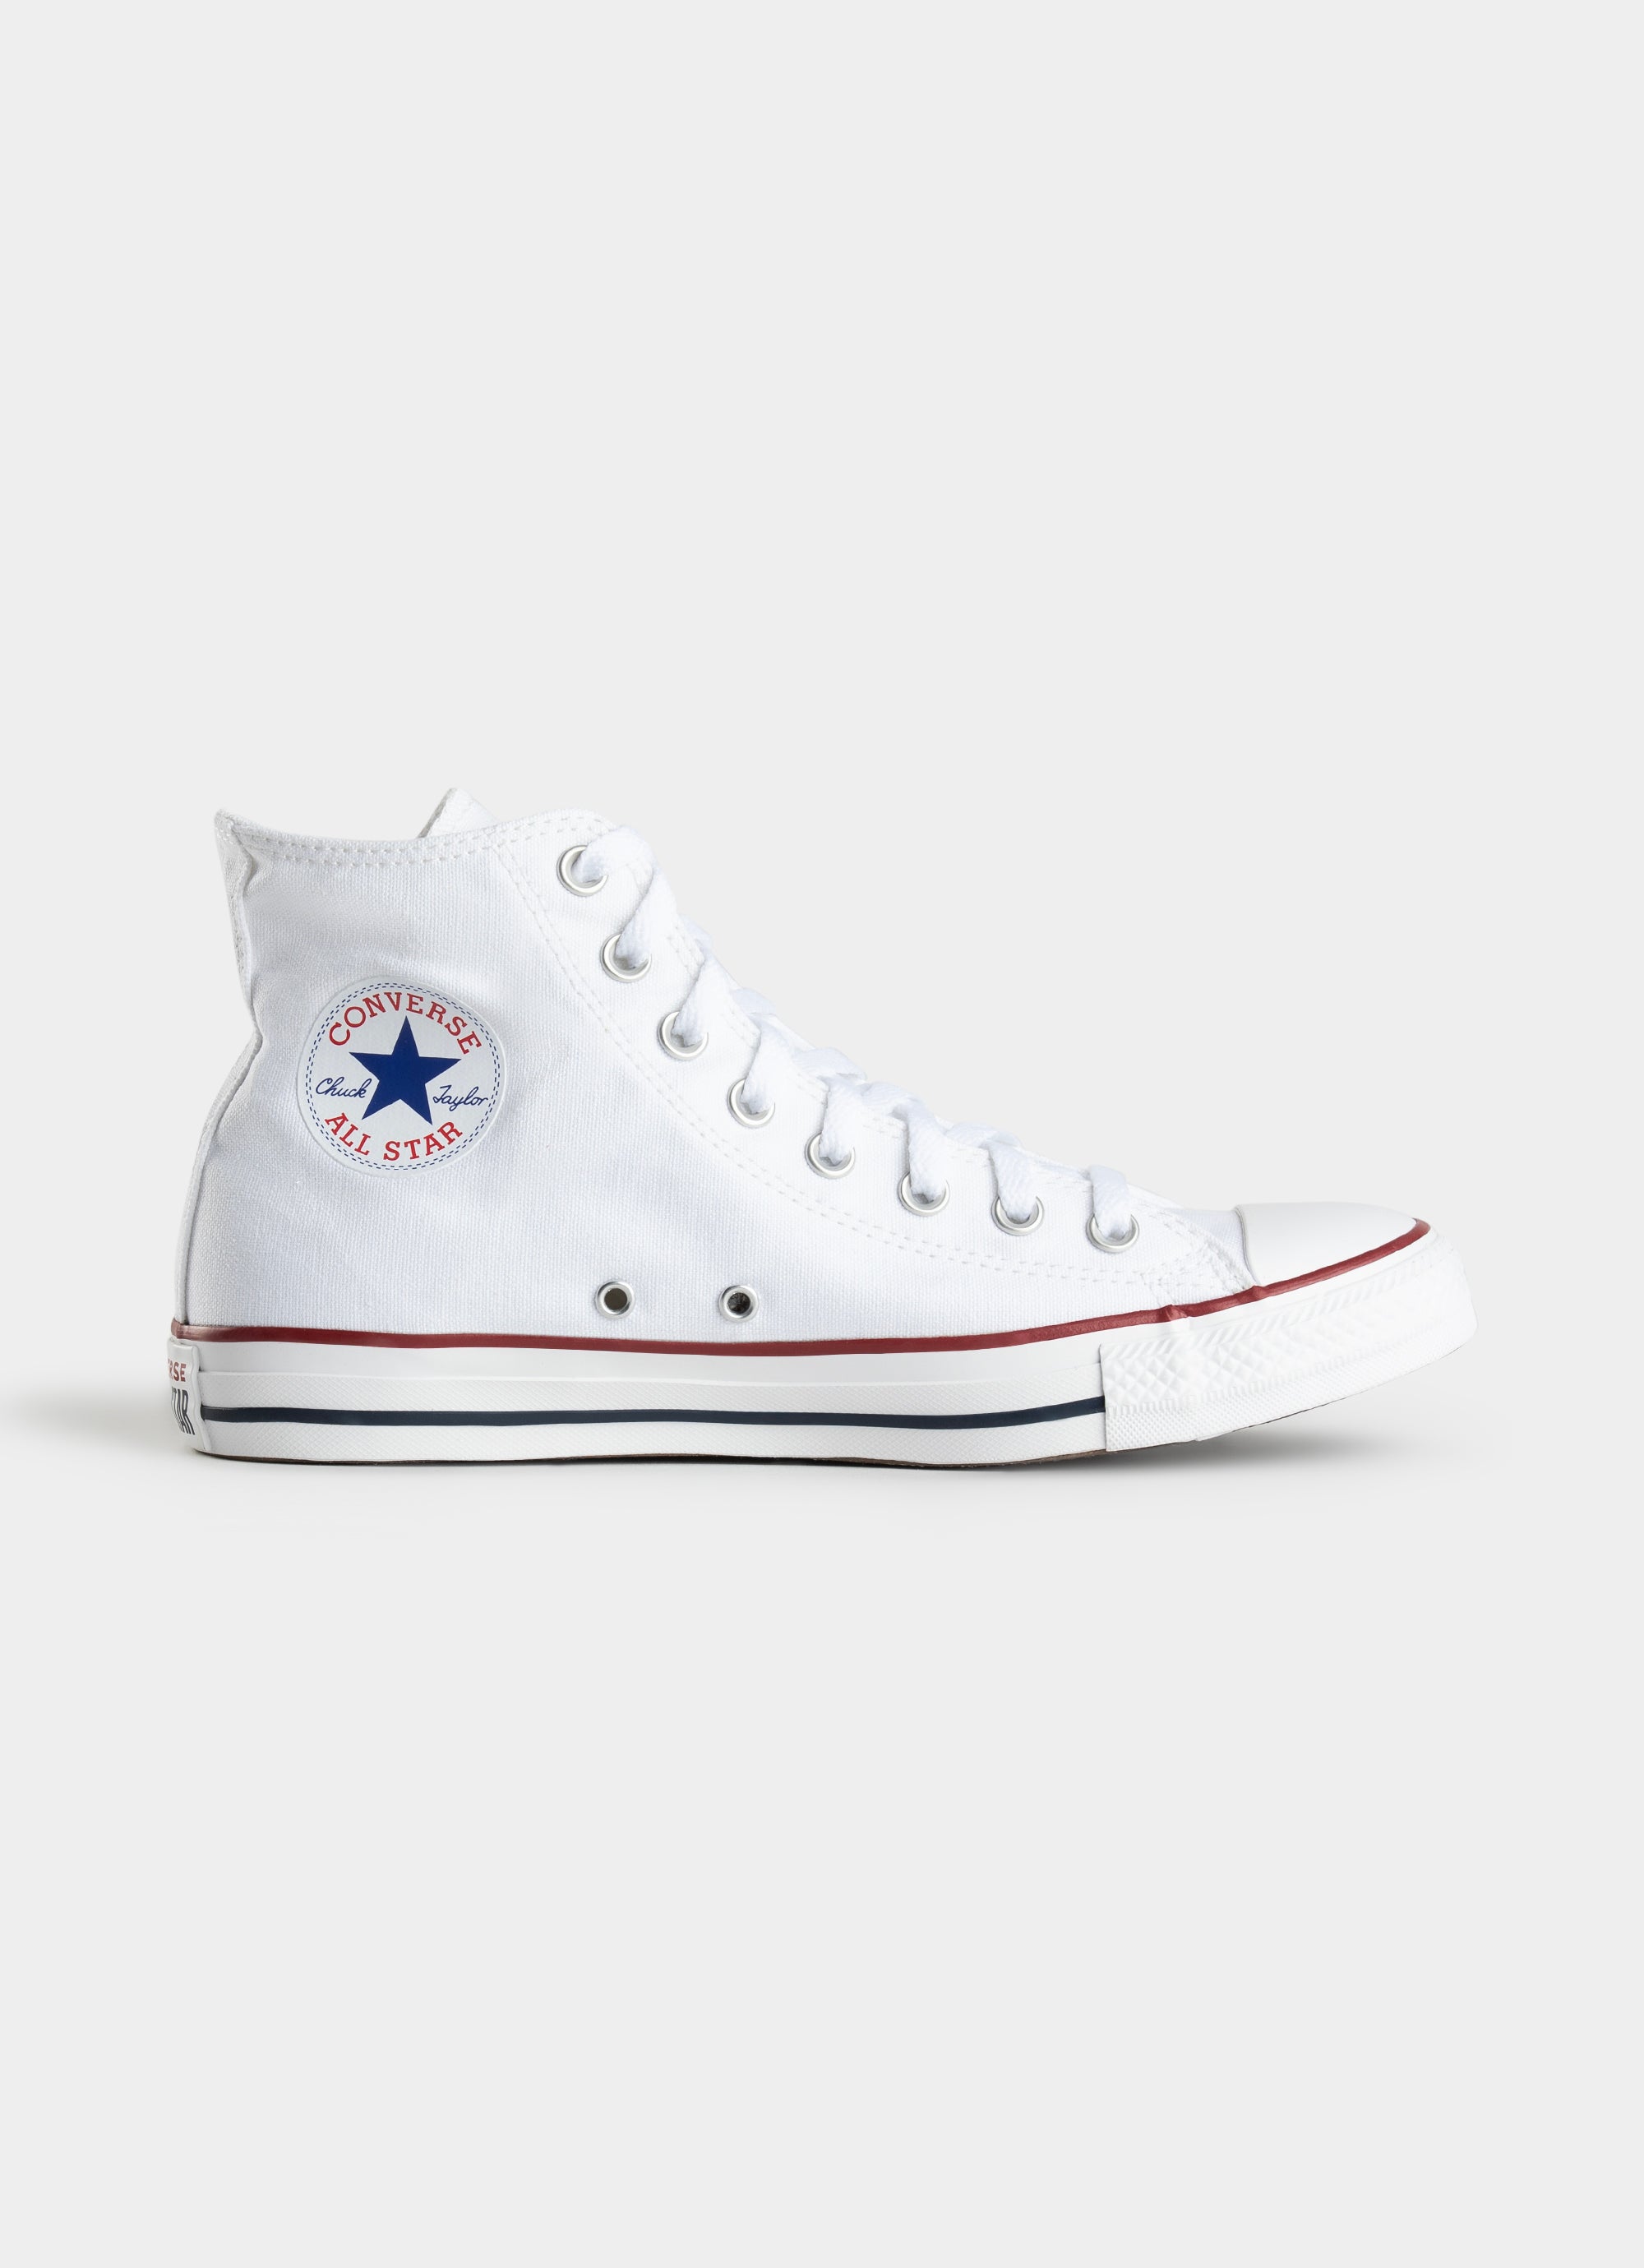 Converse Chuck Taylor All Star High Shoe in Unknown | Red Rat